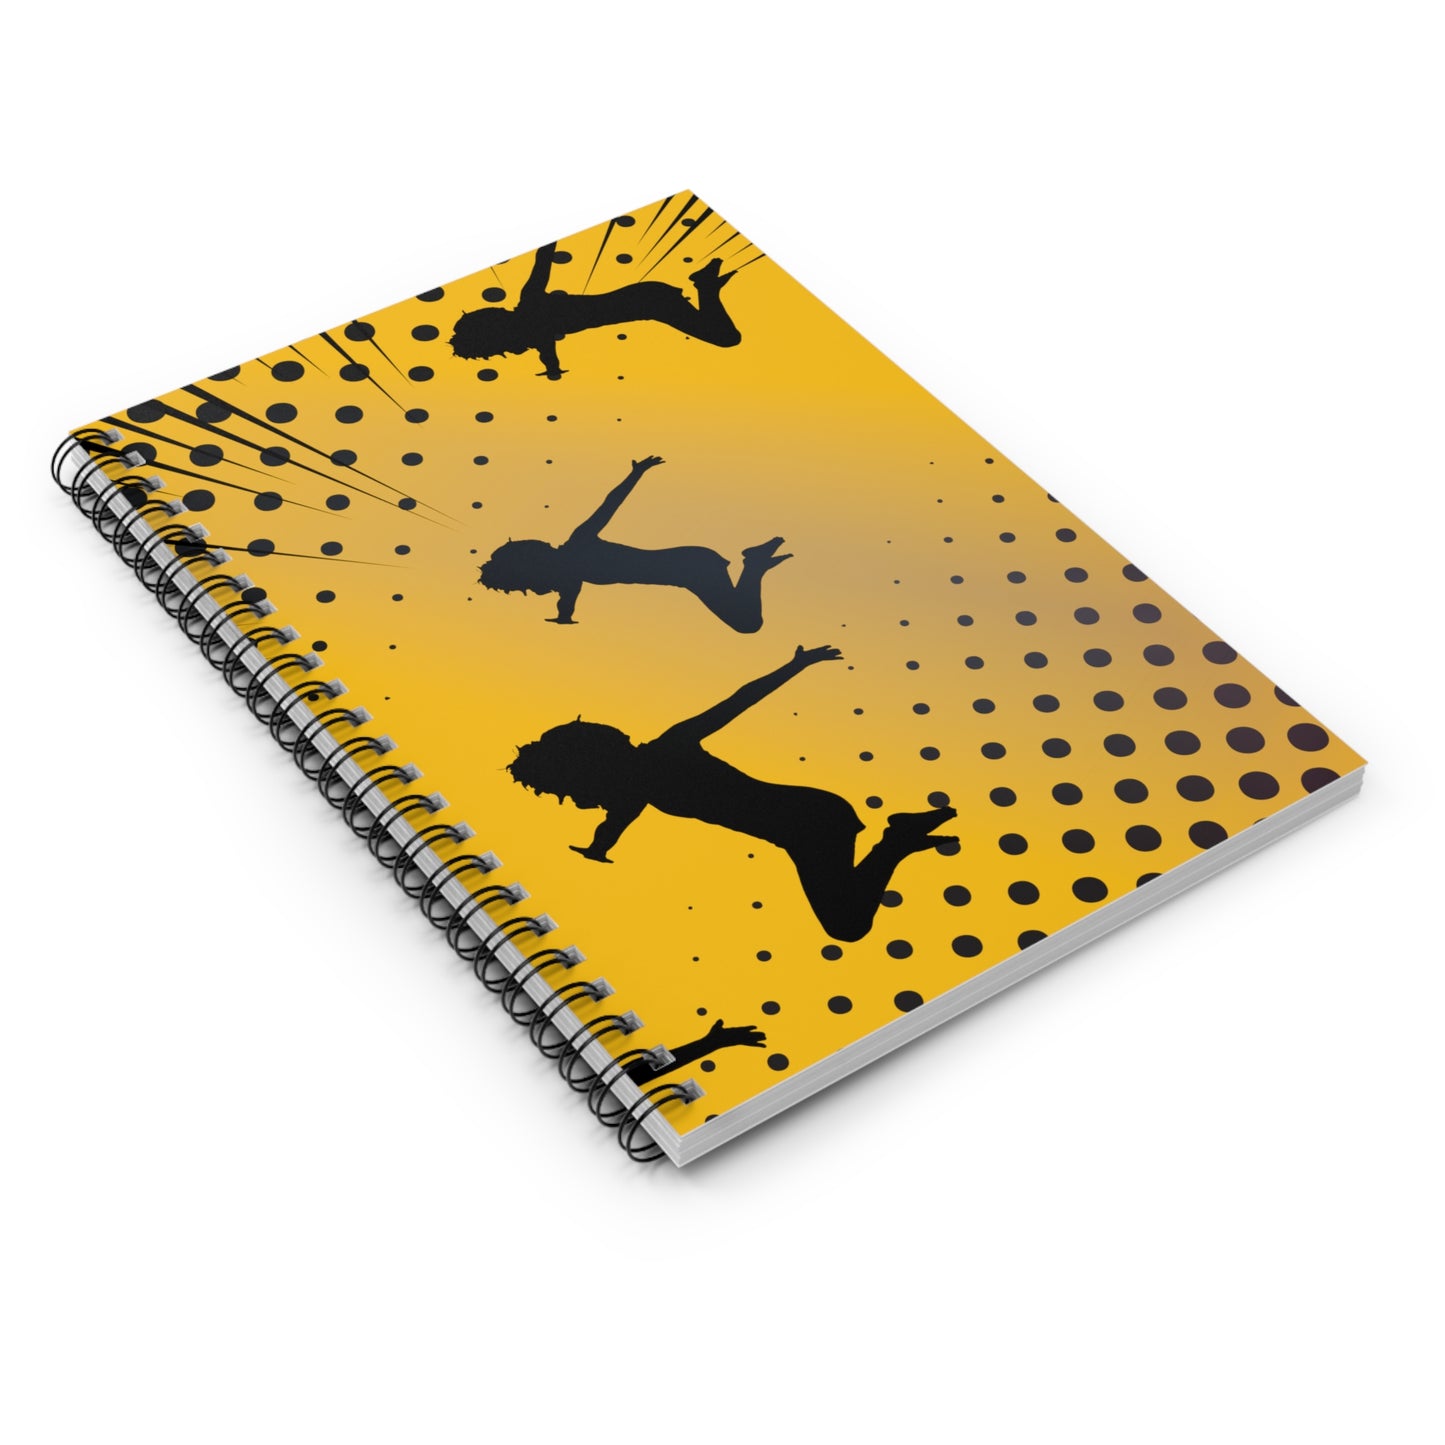 Might as Well Jump: Spiral Notebook - Log Books - Journals - Diaries - and More Custom Printed by TheGlassyLass